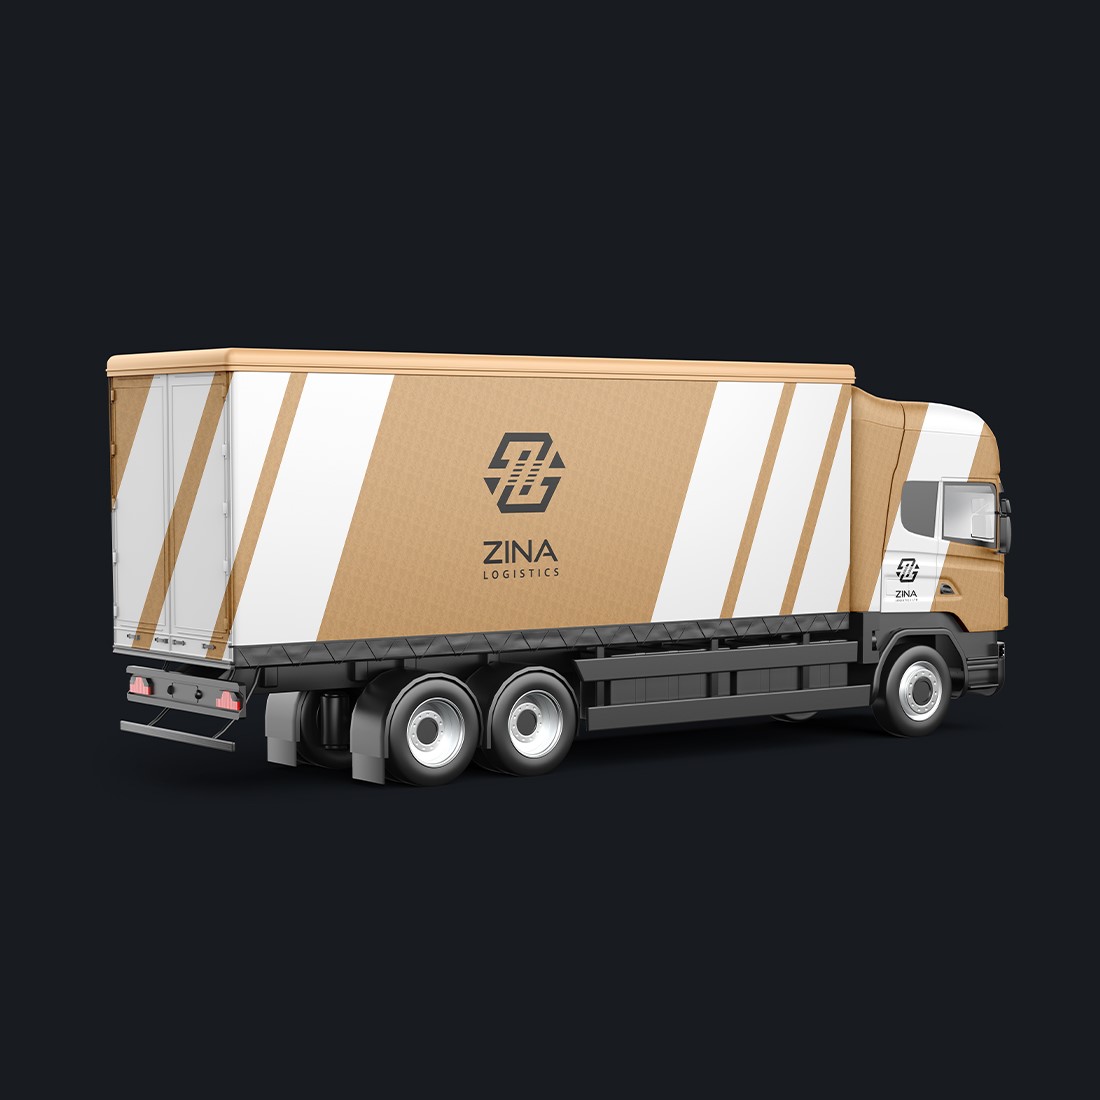 An image of a truck with an adorable transport company logo.